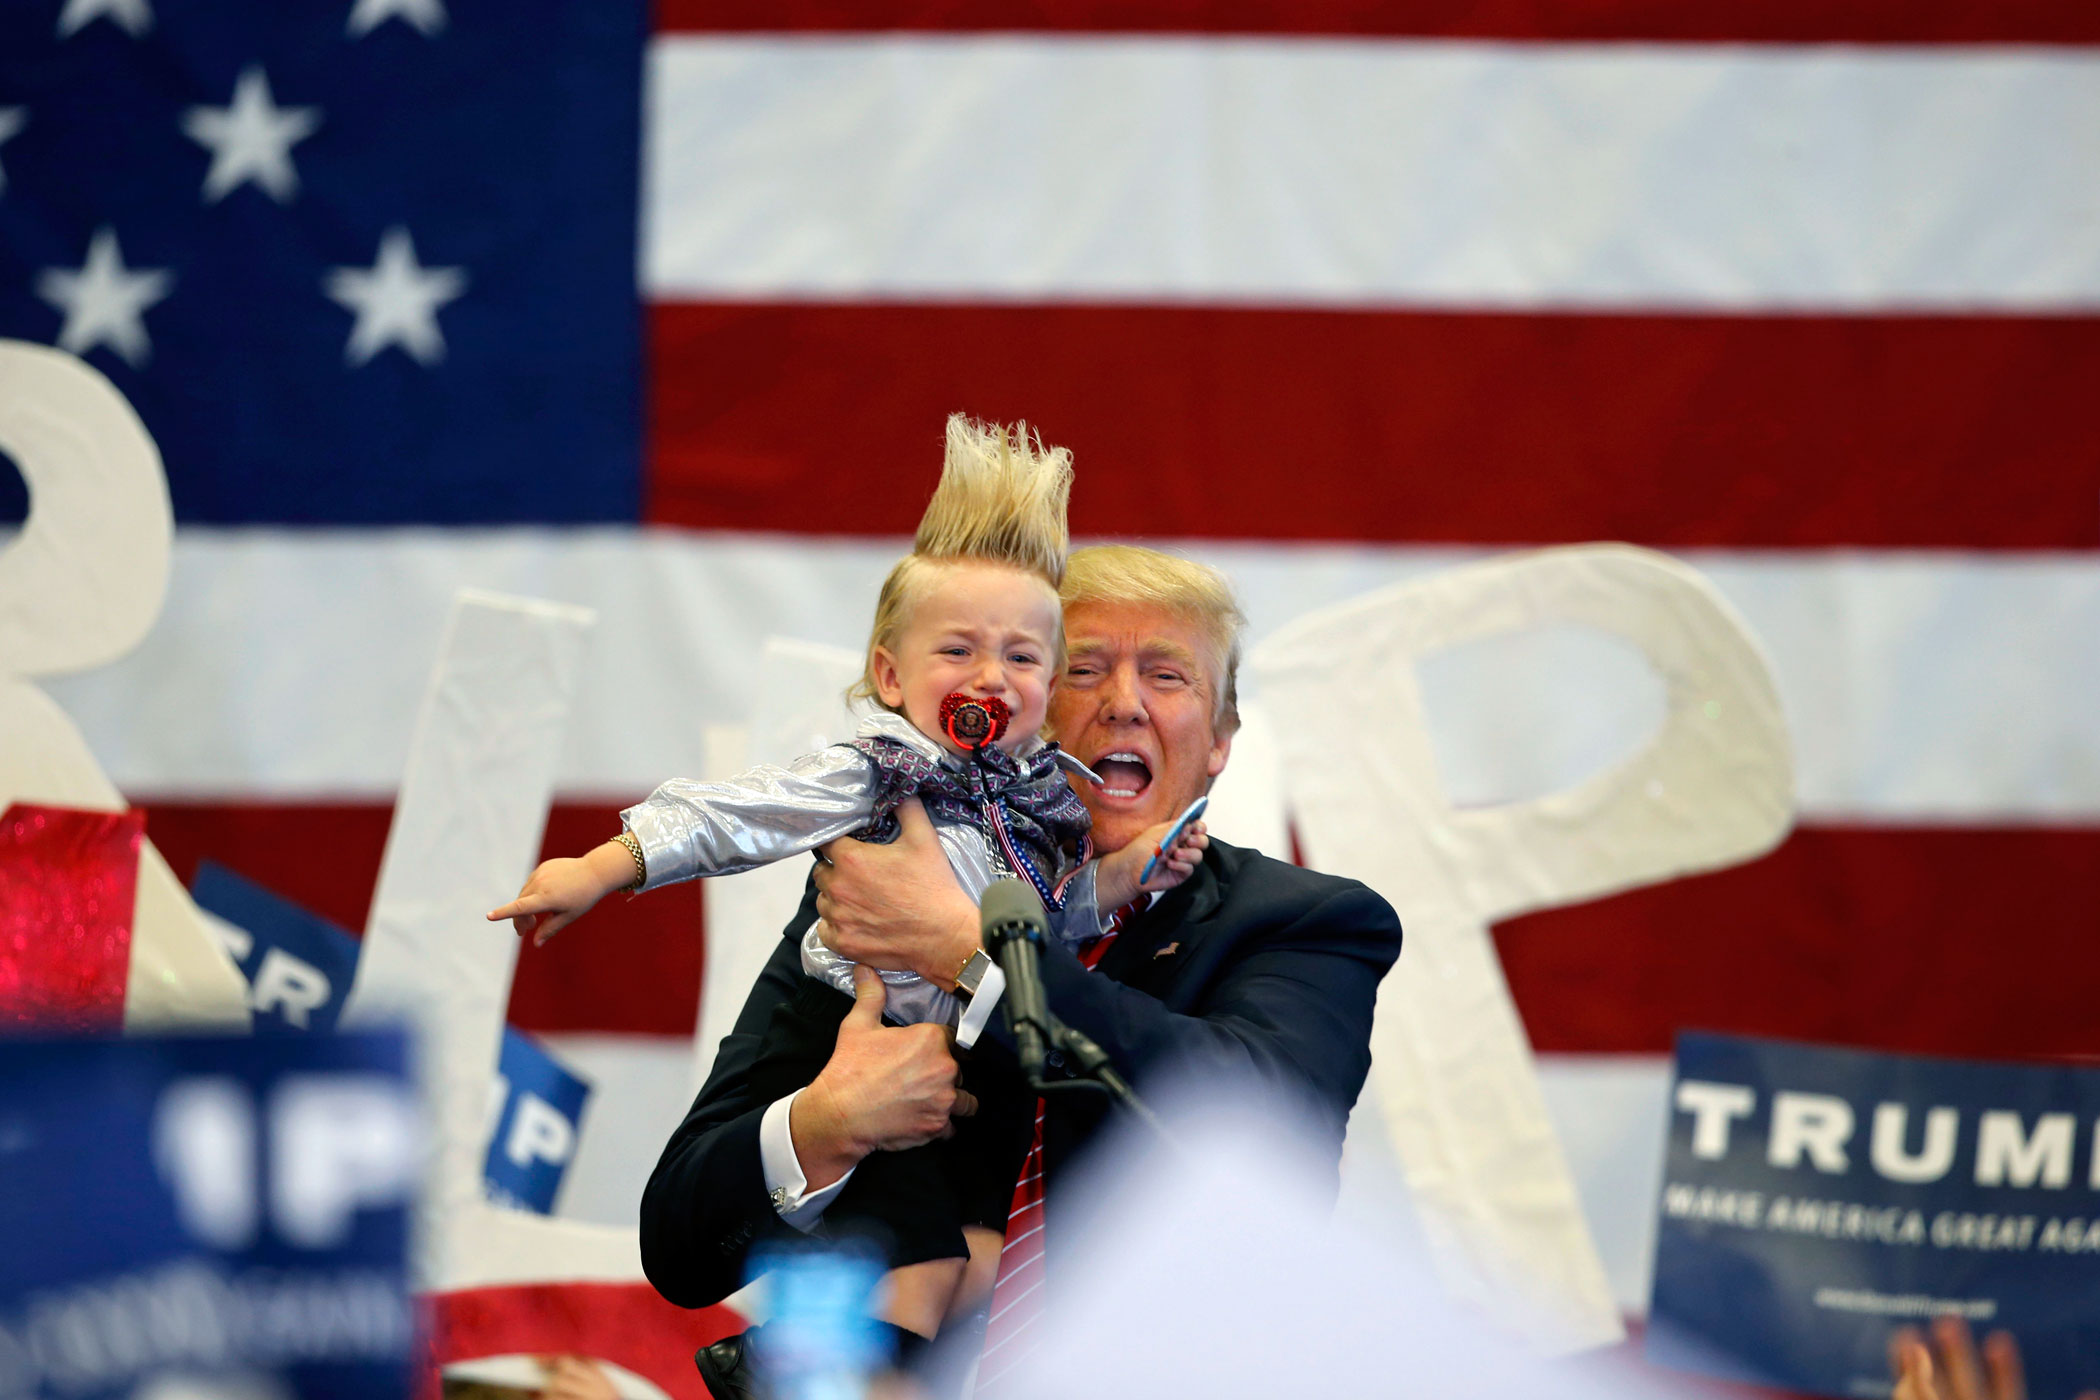 Republican presidential candidate Donald Trump holds up a child he pulled from the crowd as he arrives to speak at a campaign rally in New Orleans, Friday, March 4, 2016. (AP Photo/Gerald Herbert)